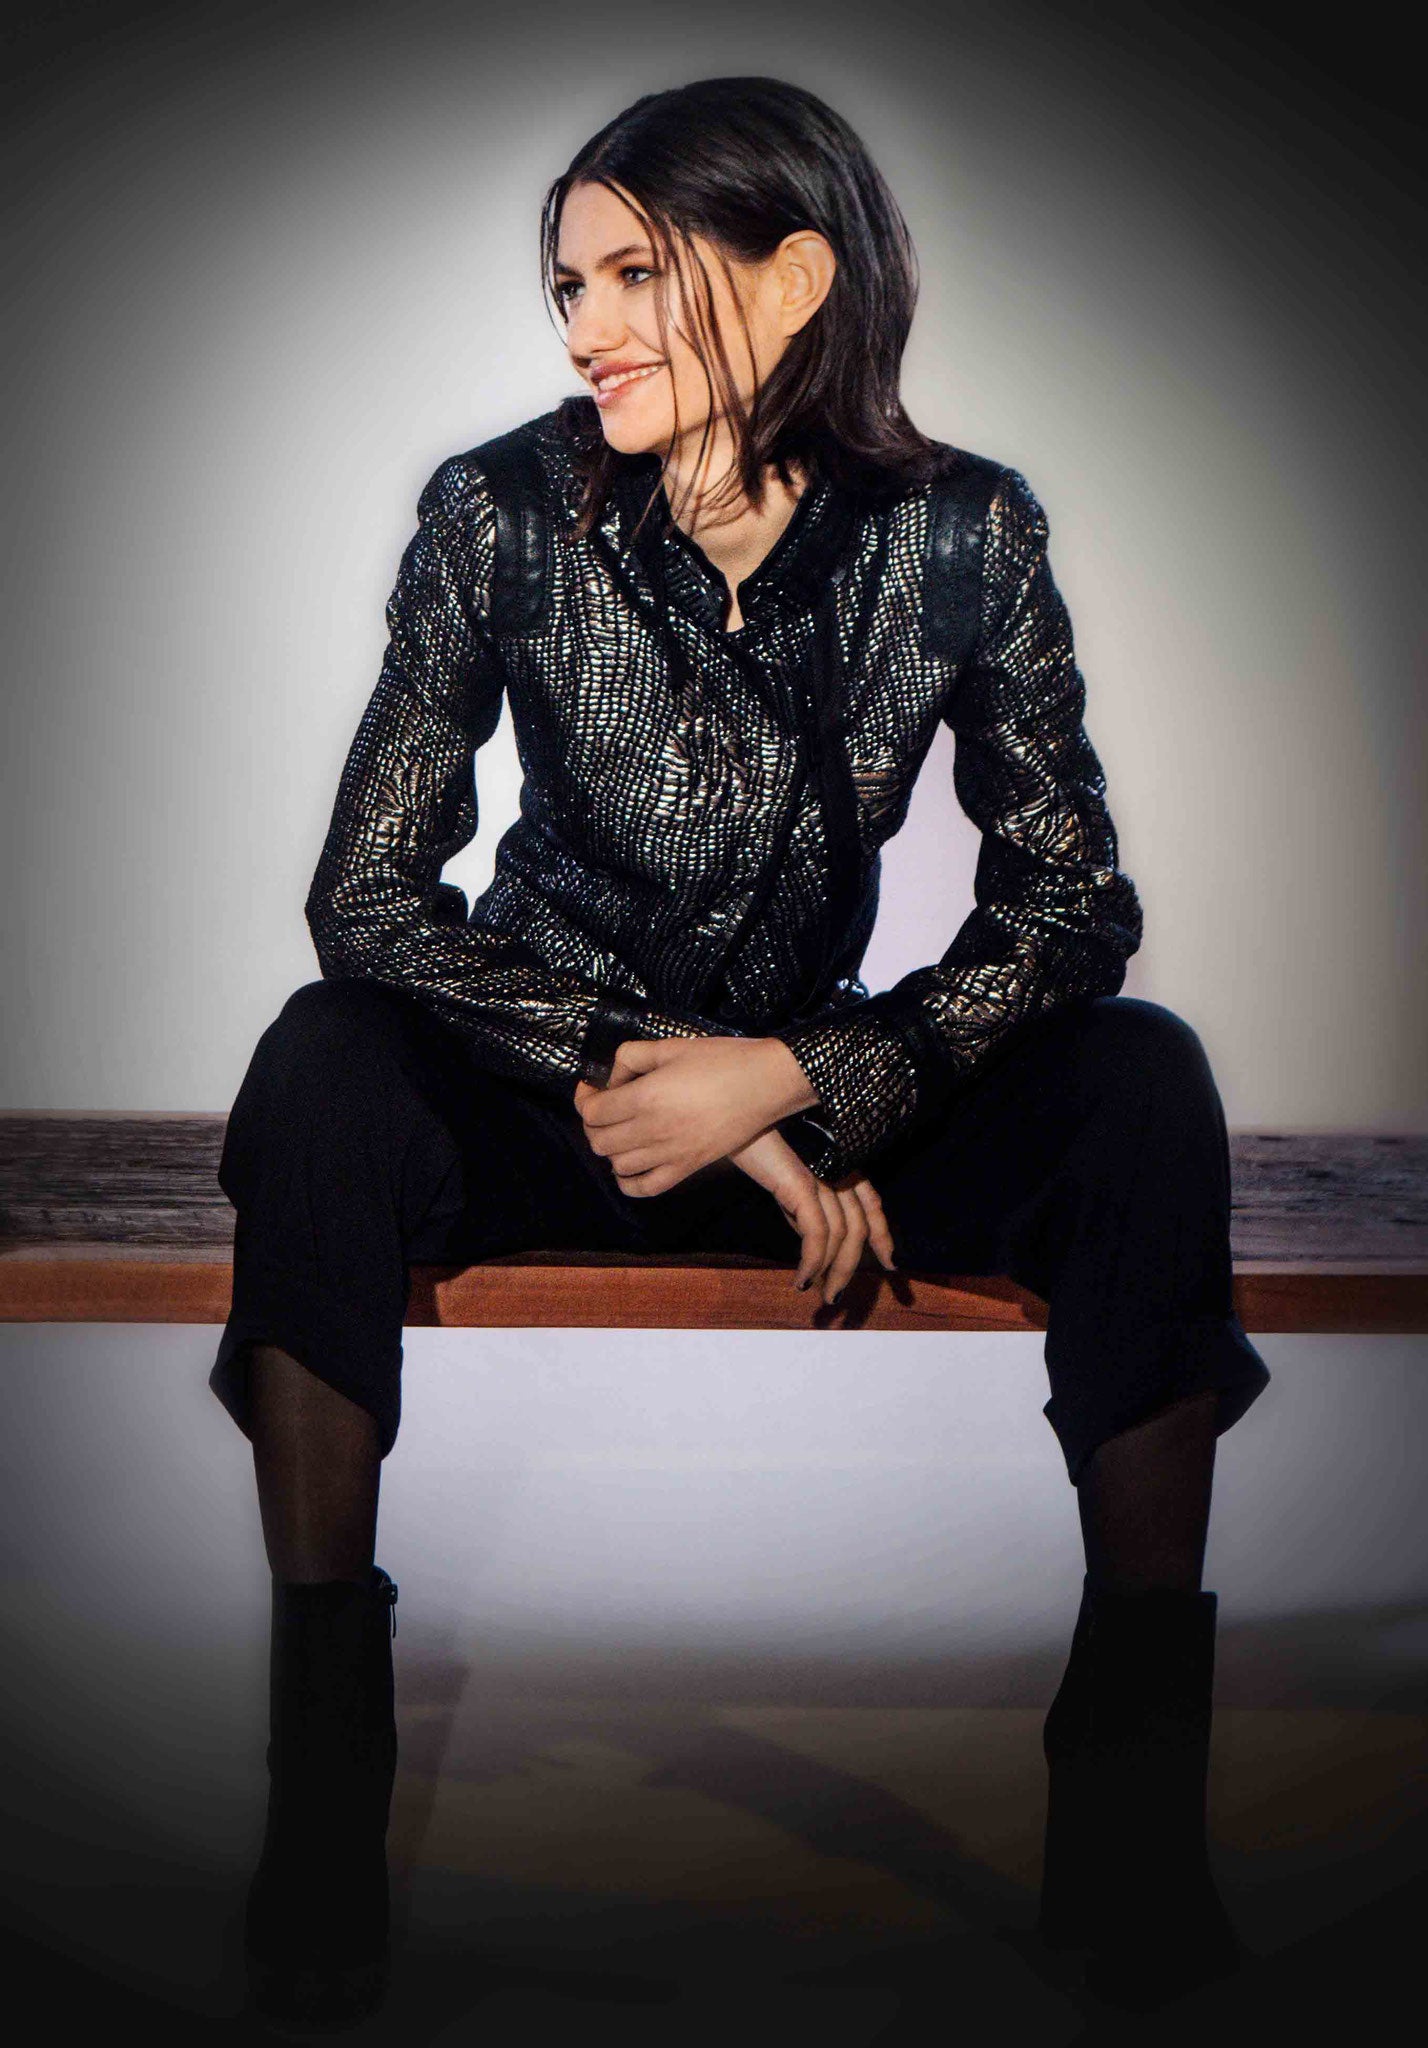 Front full body view of a woman sitting and wearing black pants and the beate heymann carbon jacket. This jacket is black with a cracked gold print all over it. The jacket is short with long sleeves, and off-center zipper, and a notched collar.